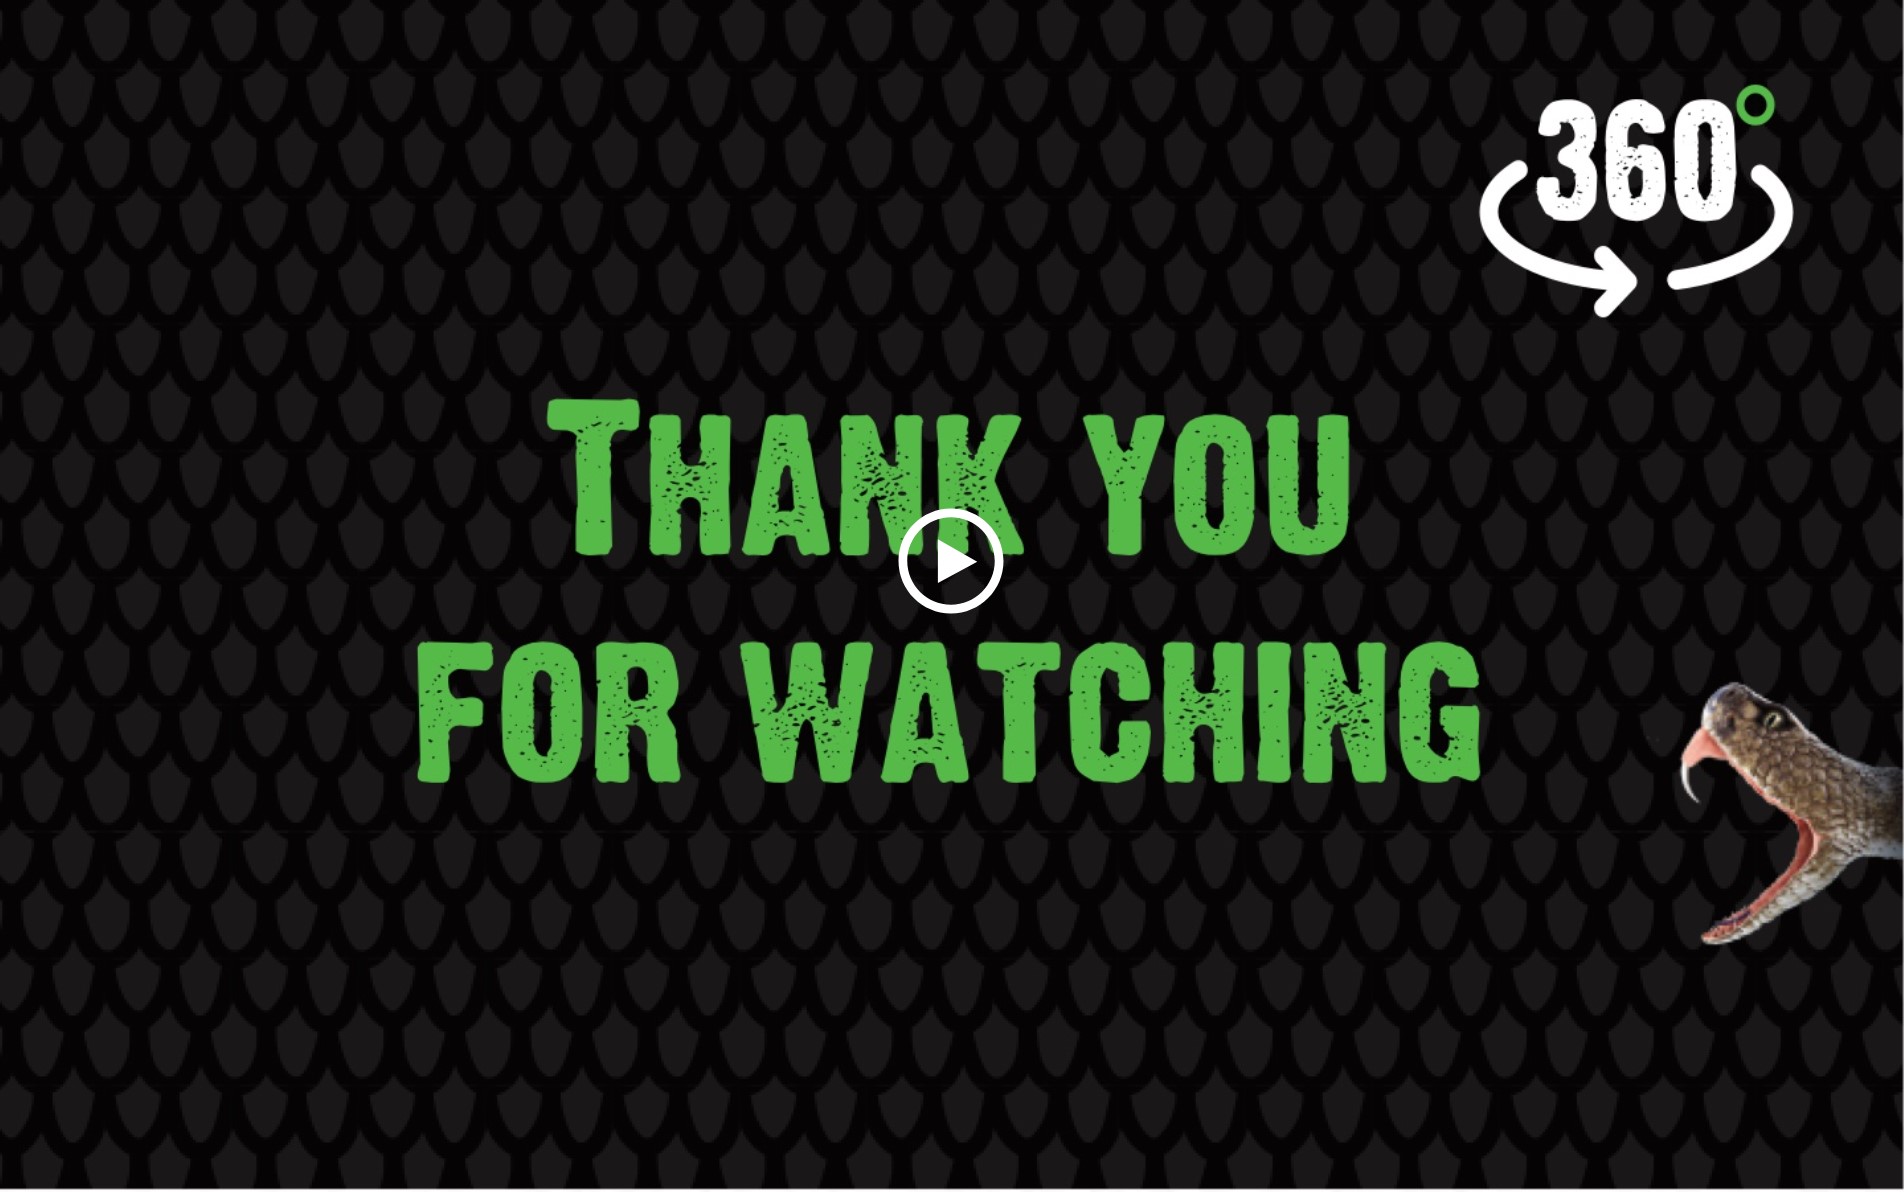 Chapter 5 – Closing large video thumbnail; green “Thank you” text with striking snake head on right